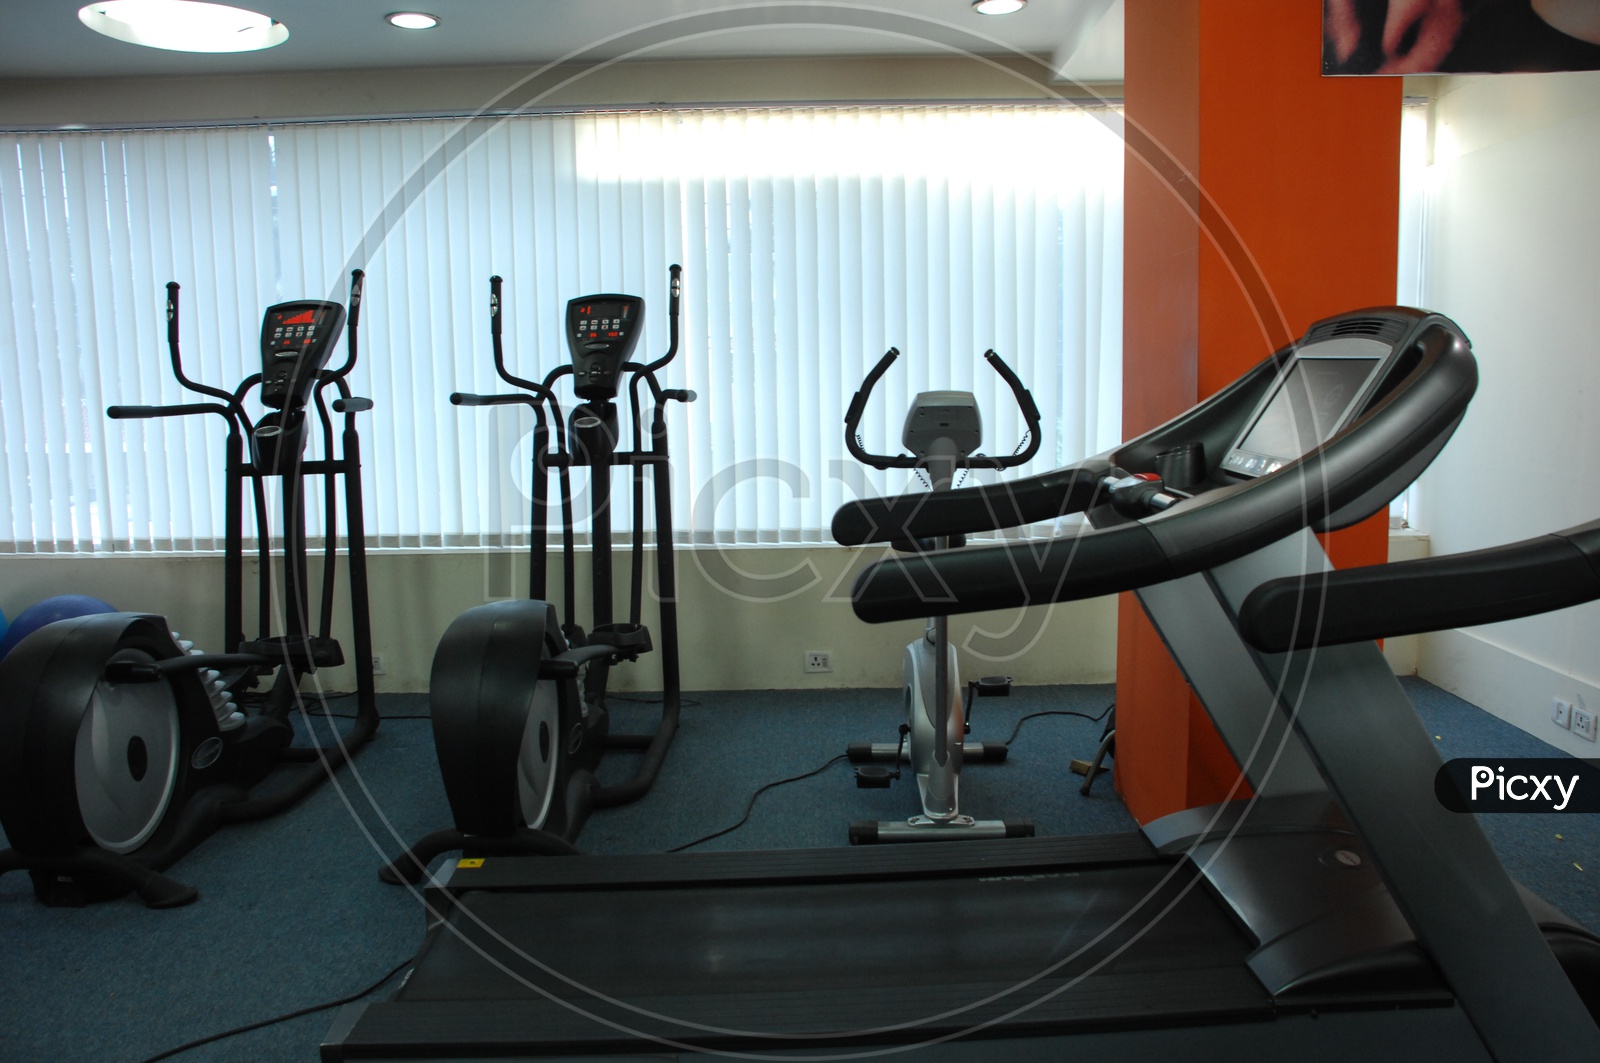 Fitness and strengthening equipment in the gym - Treadmills and cycles